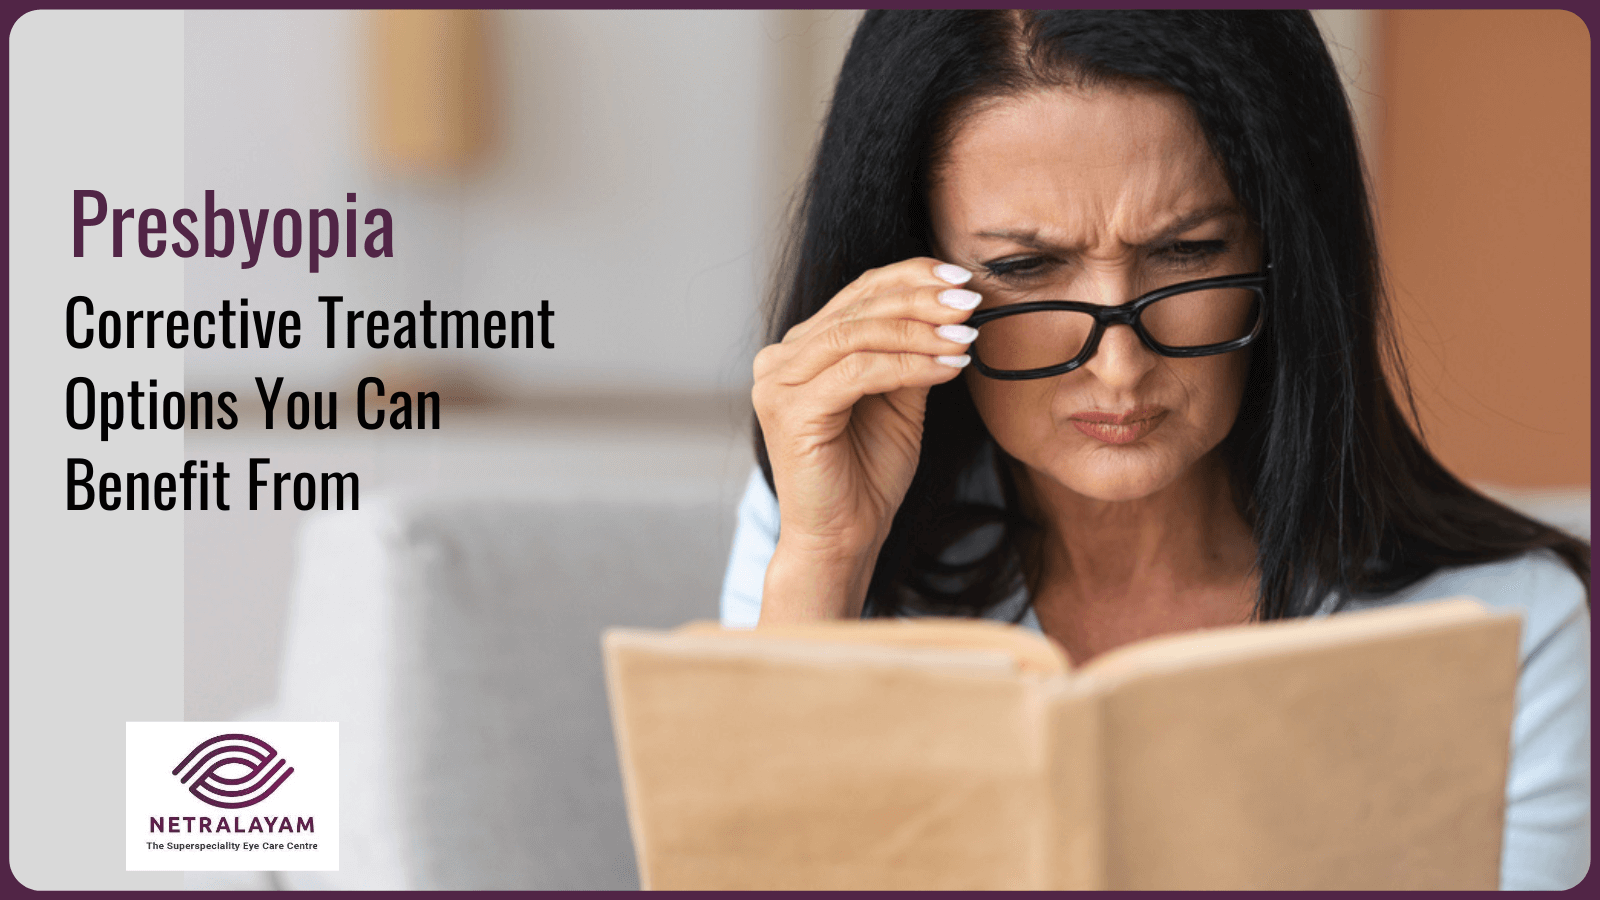 Presbyopia Corrective Treatment Options You Can Benefit From